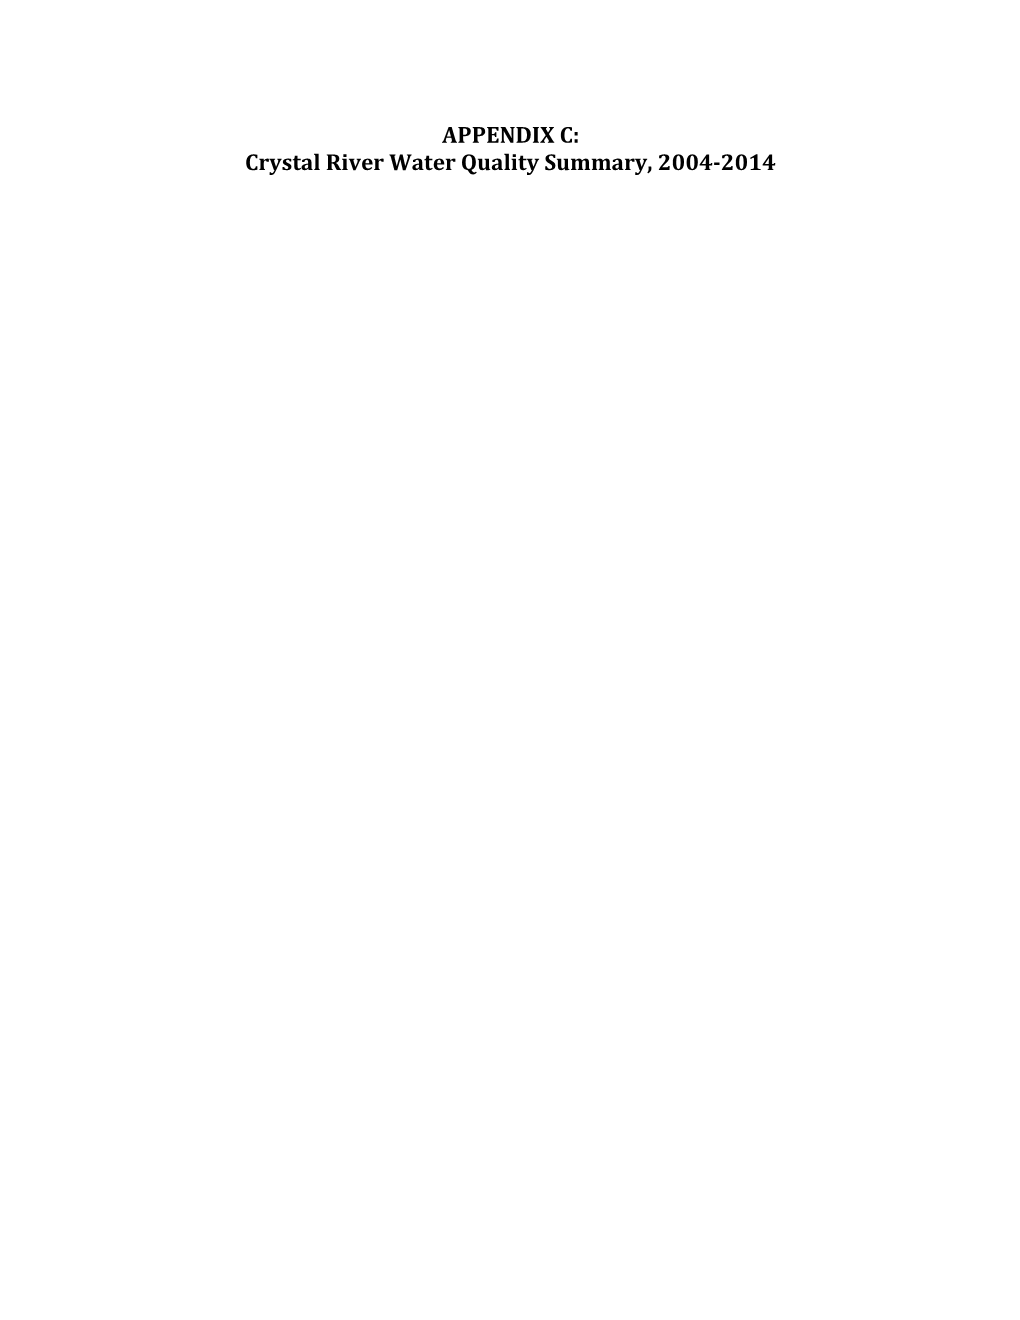 Crystal River Water Quality Summary, 2004-2014